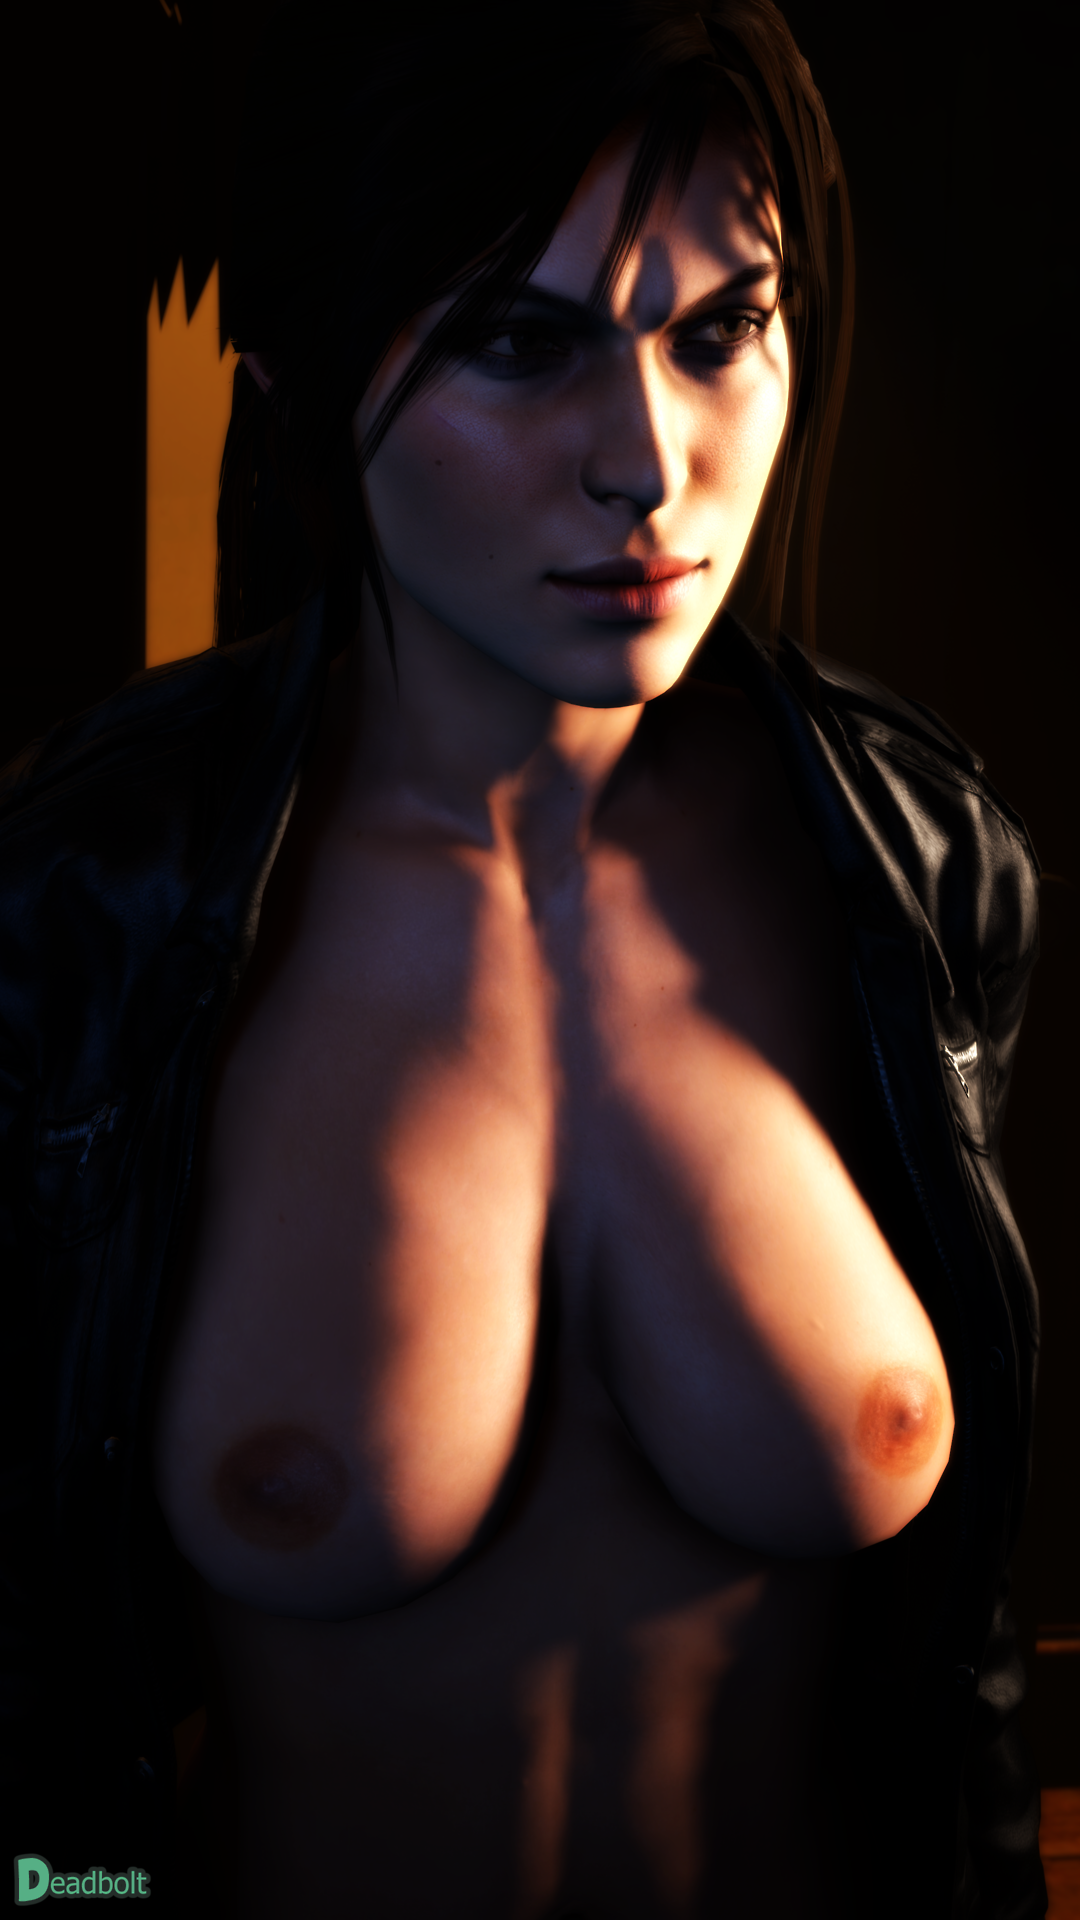 Lara Croft Jacket OnlyNote: This is in reference to a scene by Sasha2000dog who some